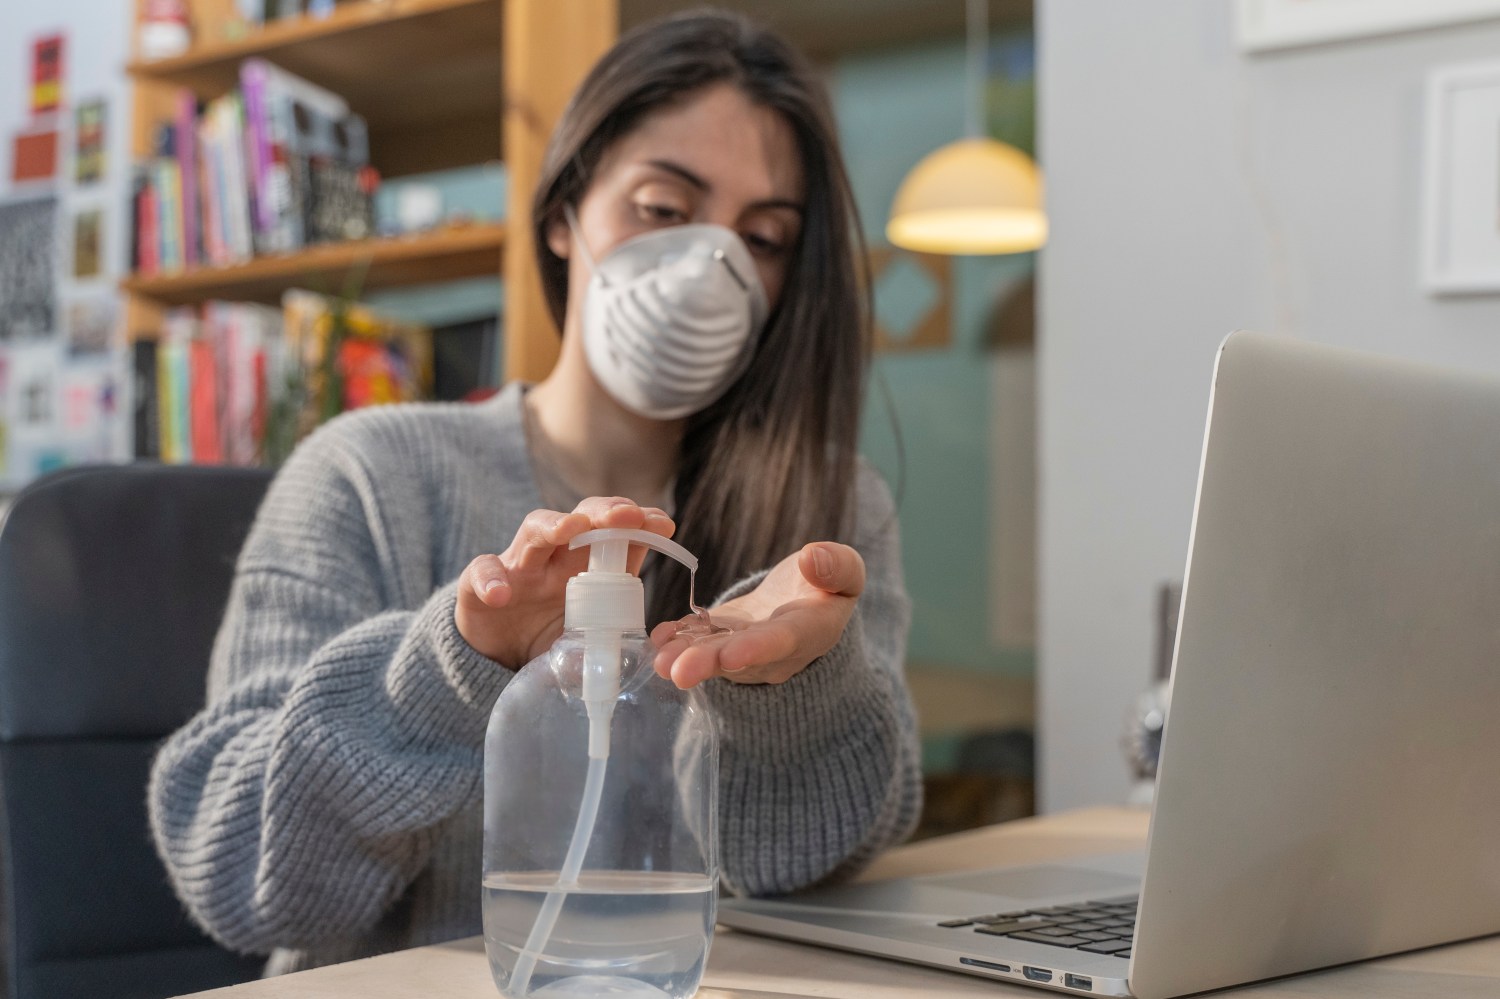 Coronavirus. Business woman working from home wearing protective mask. Business woman in quarantine for coronavirus wearing protective mask. Working from home. Cleaning her hands with sanitizer gel.